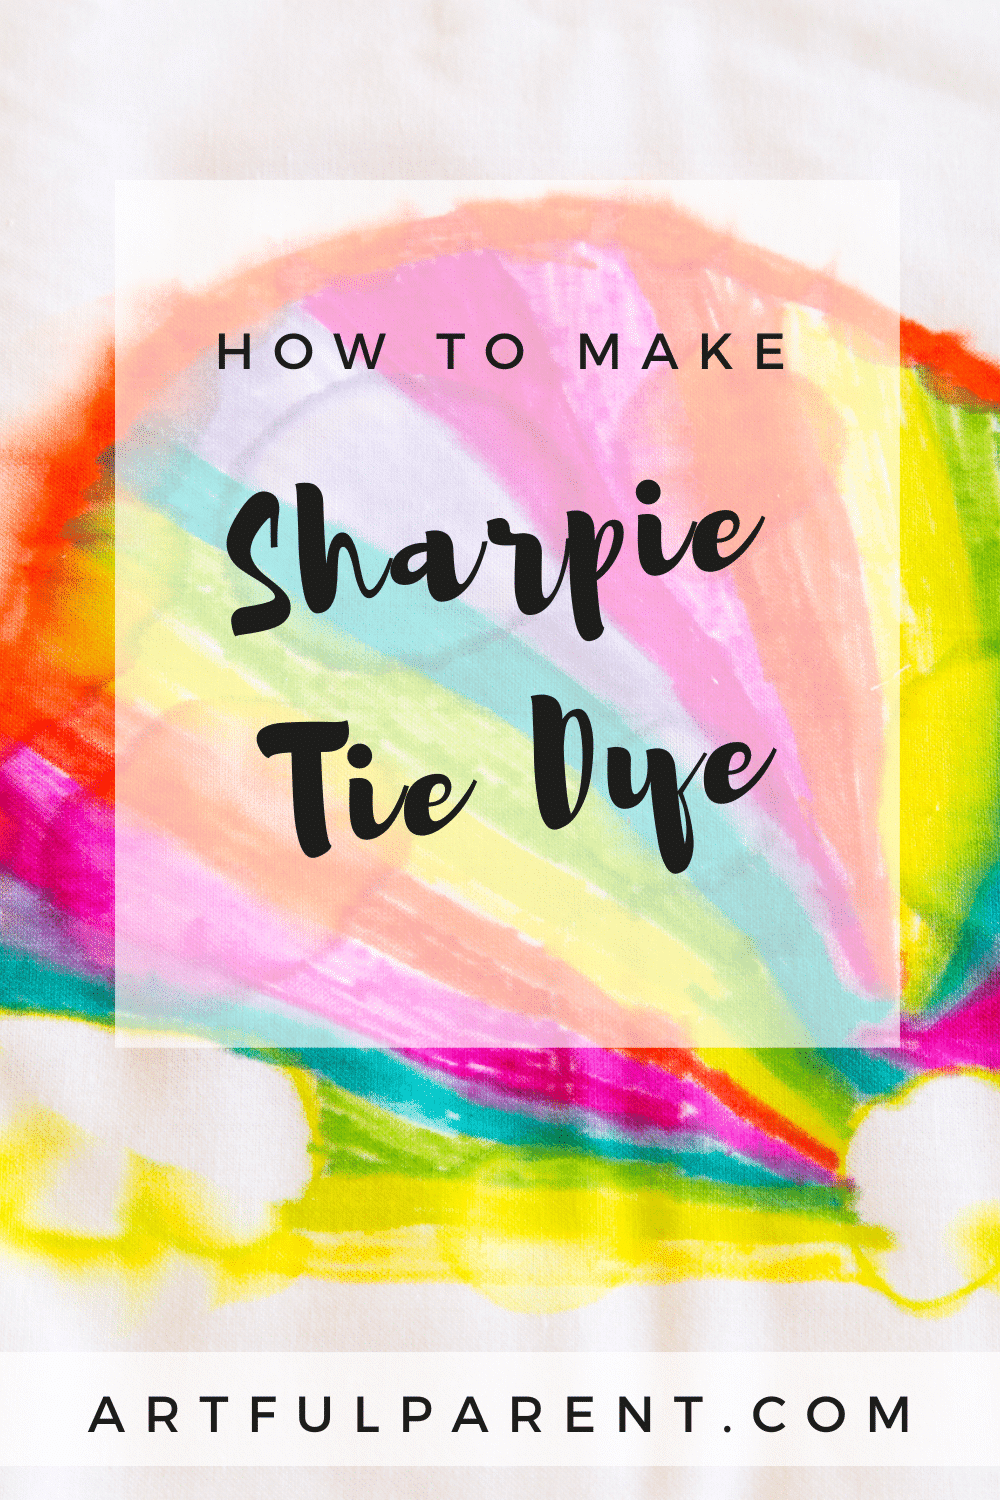 How to Make Sharpie Tie Dye Pillows